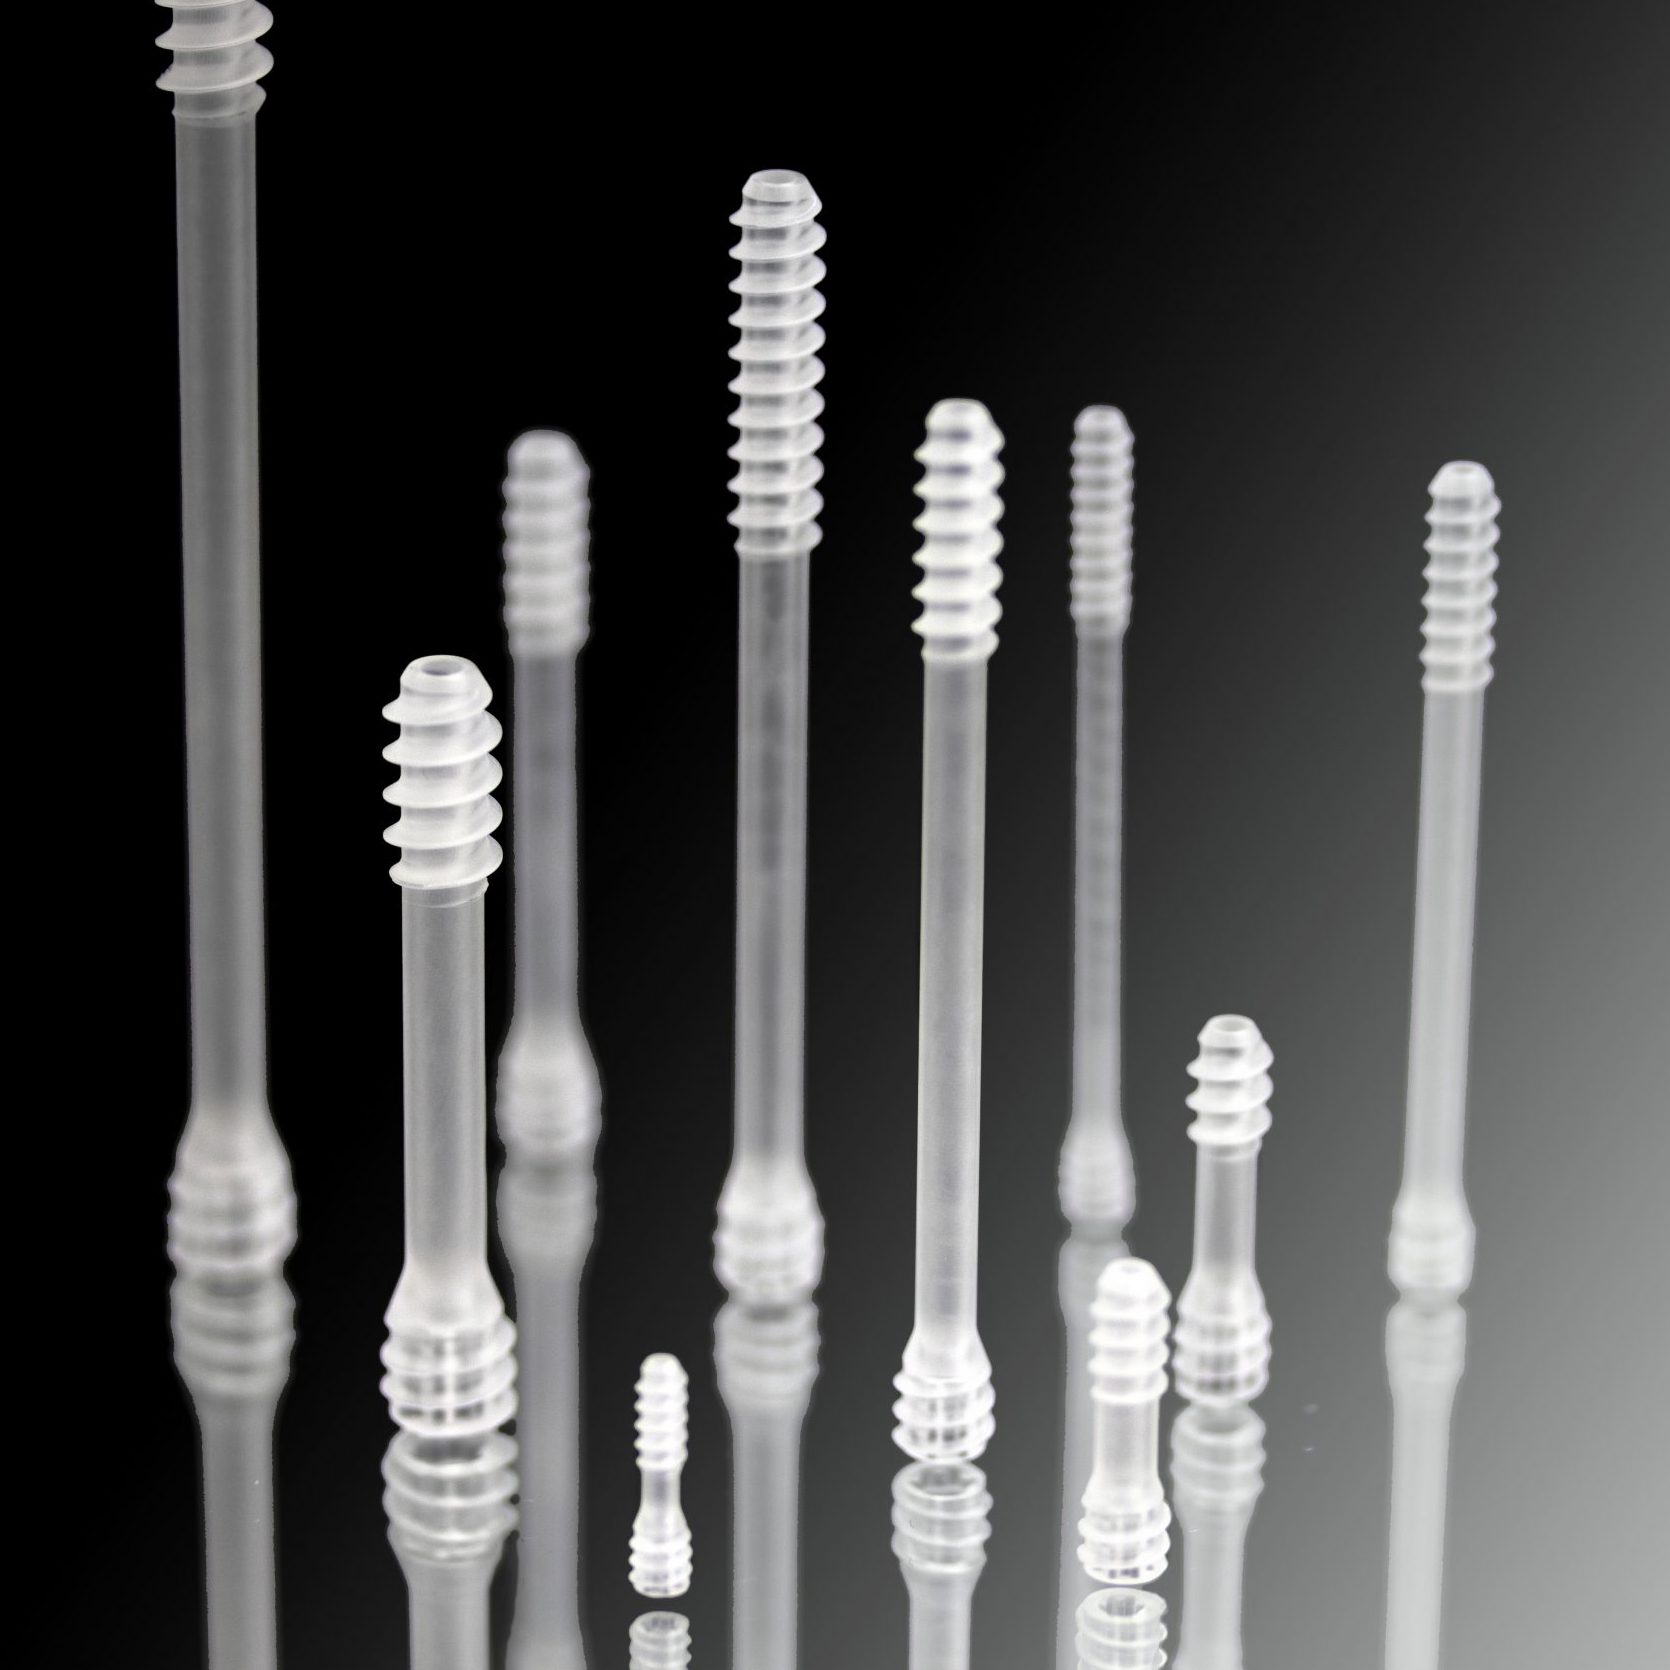 Black and white photo of bioabsorbable surgical screws in different sizes. The screws are placed on a mirror so their reflections are showing.